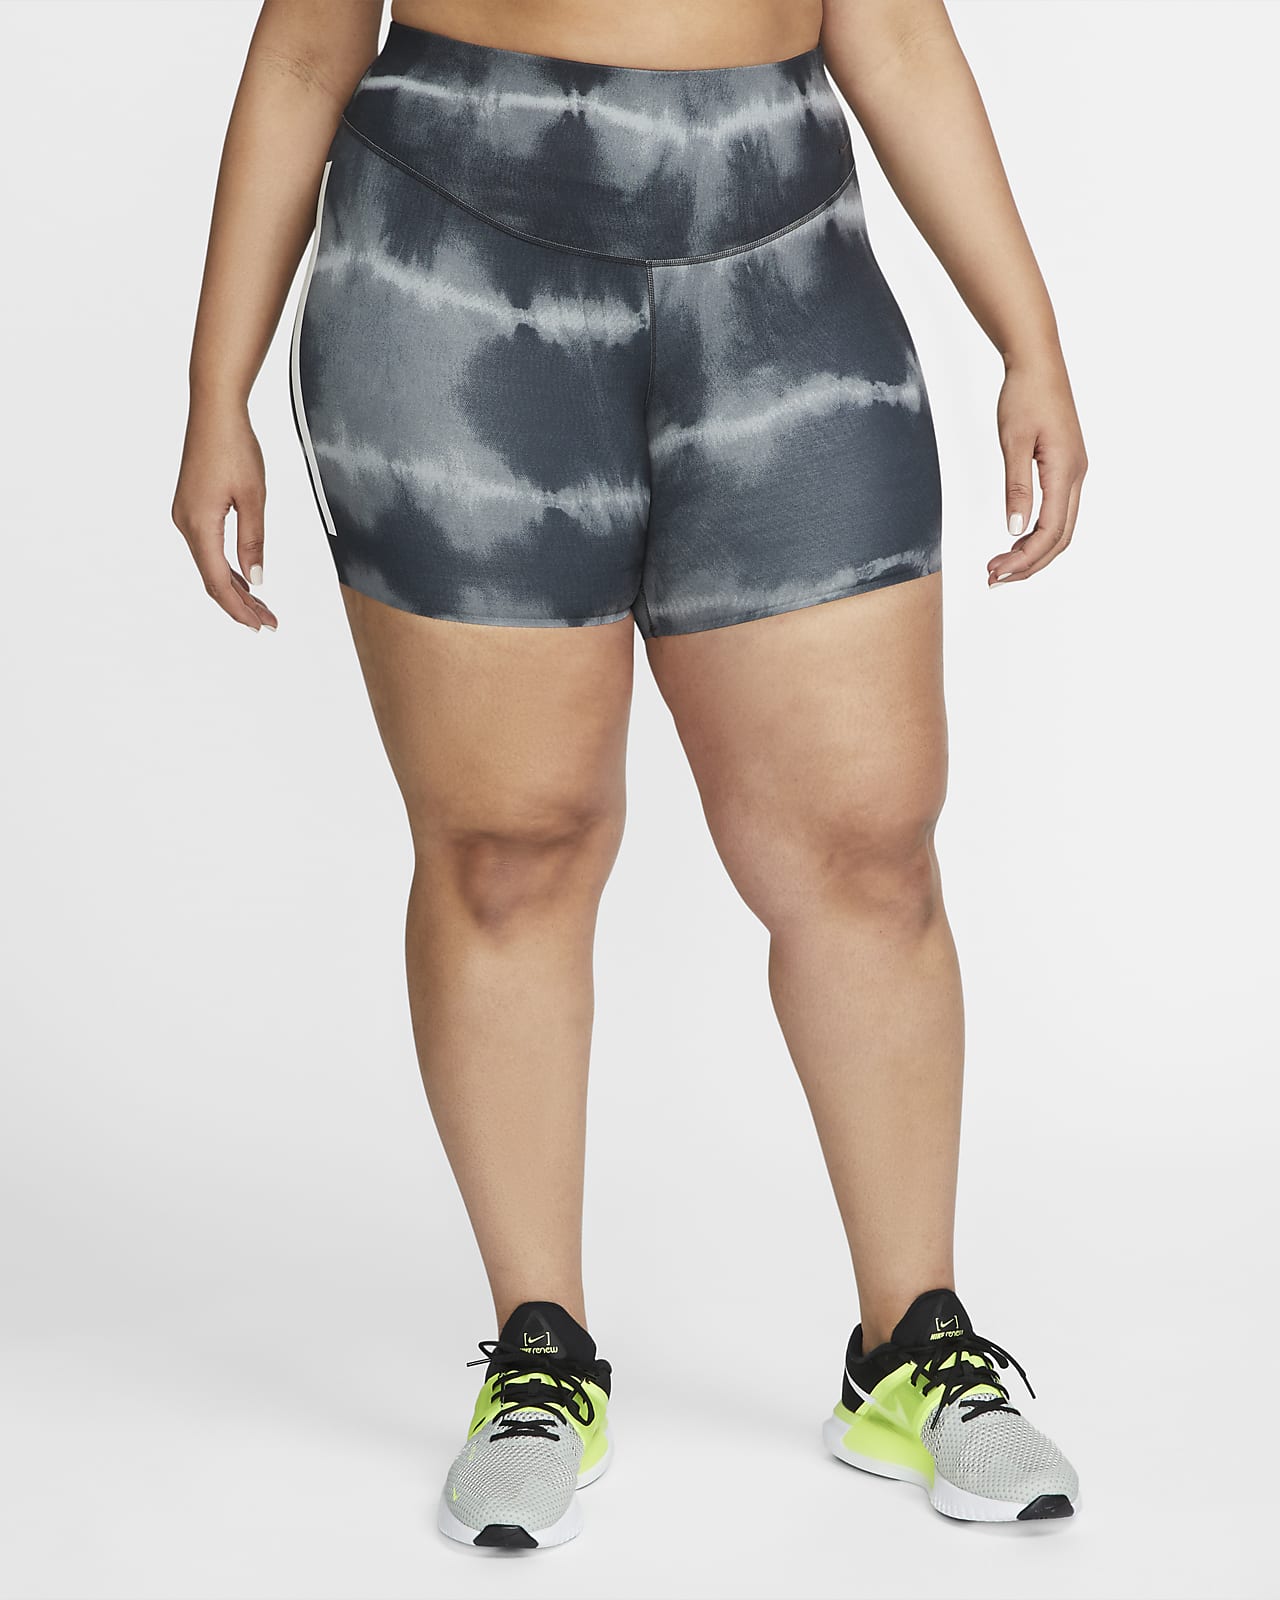 Nike One Luxe Women's 7 Mid-Rise Printed Training Shorts (Plus